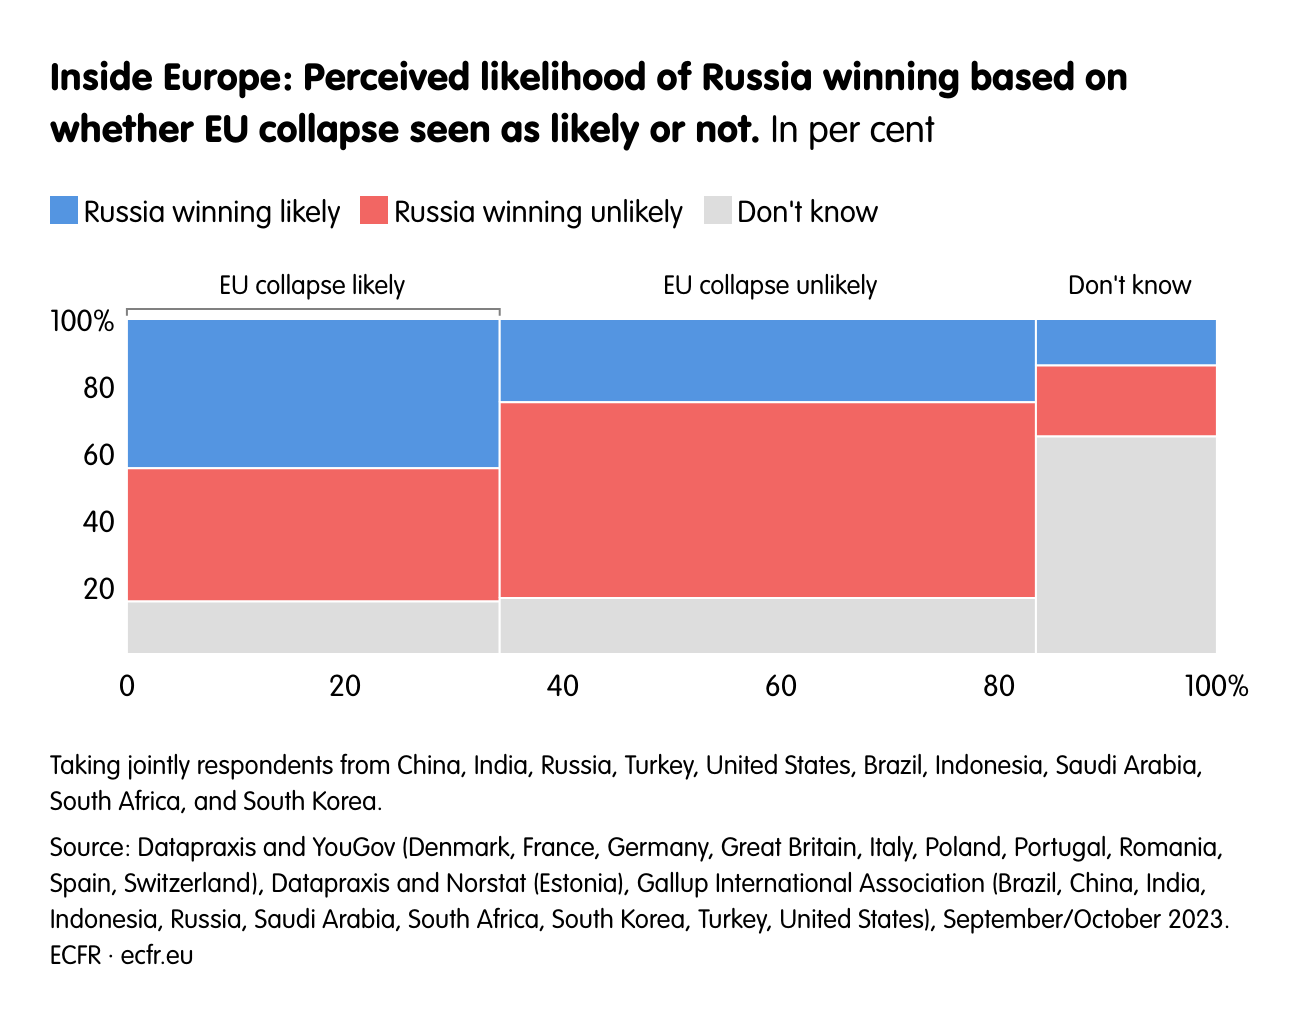 Inside Europe: Perceived likelihood of Russia winning based on whether EU collapse seen as likely or not.